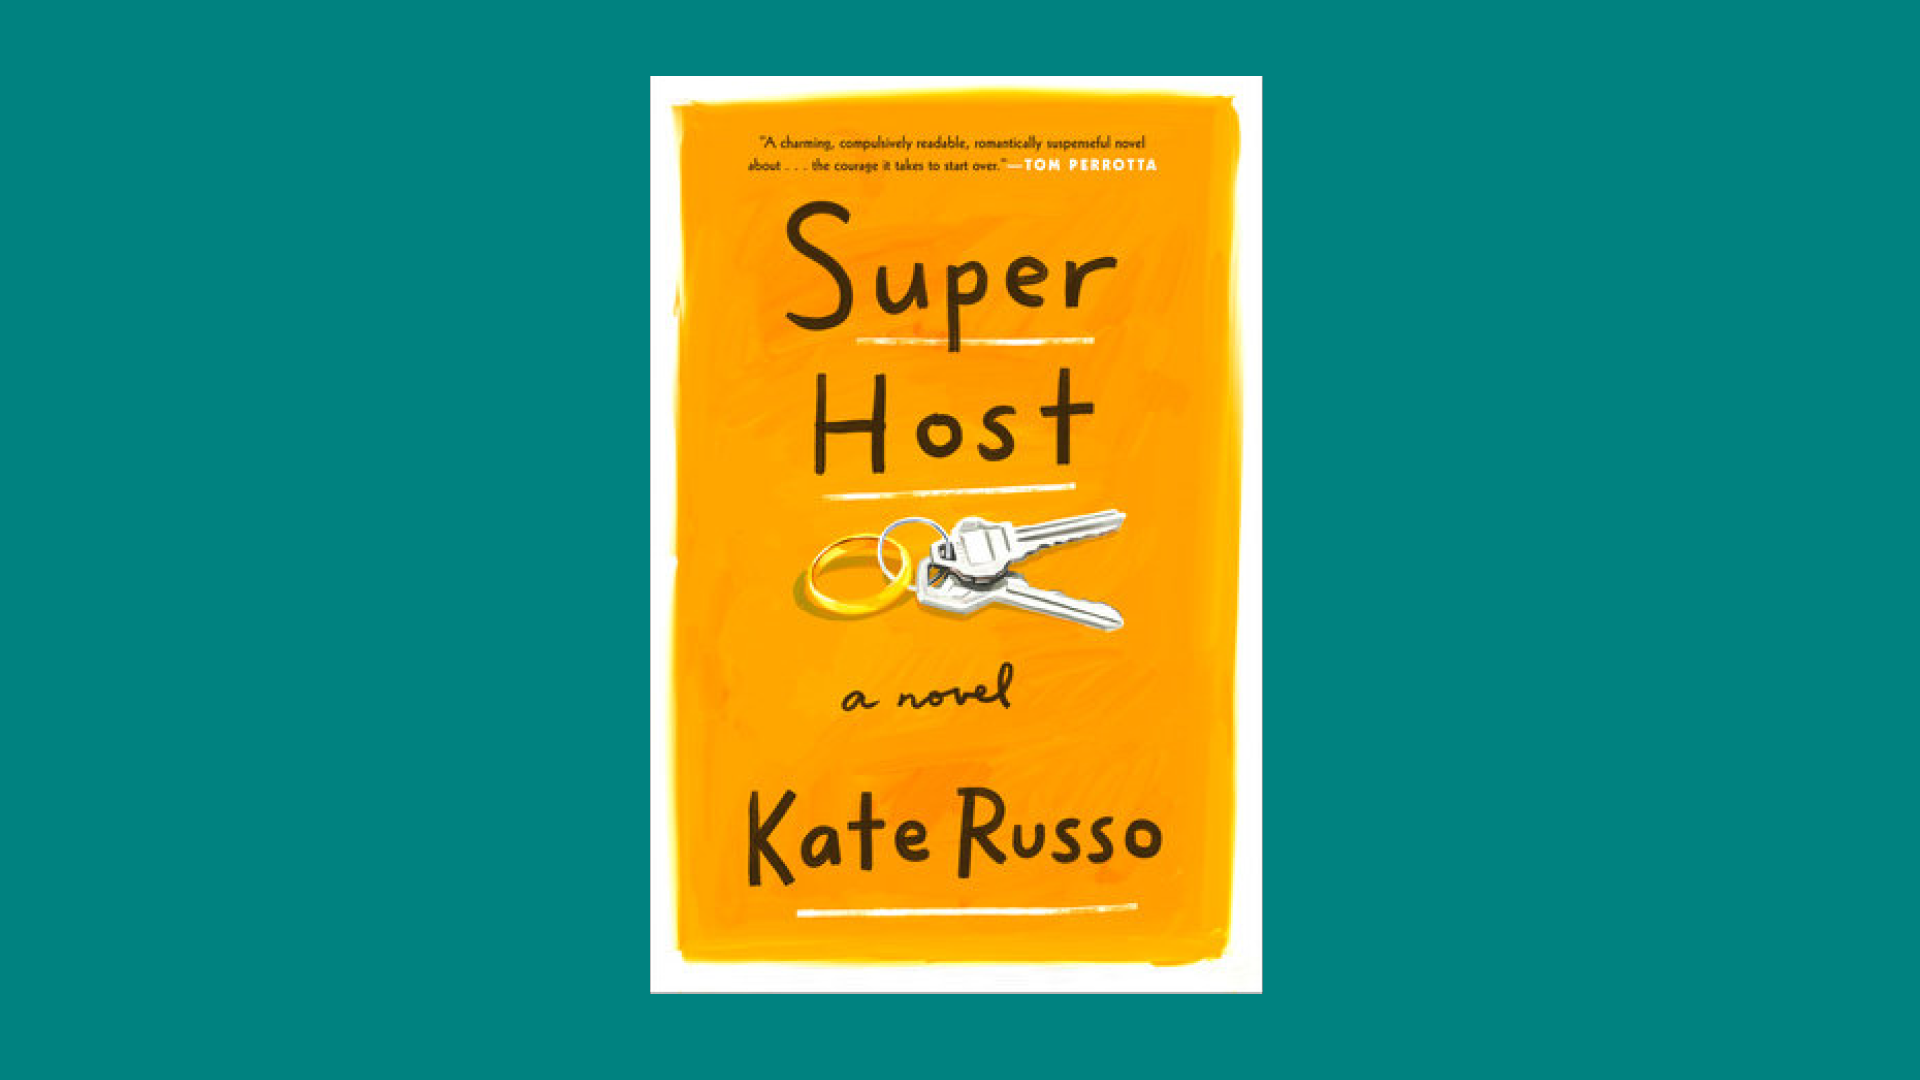 “Super Host” by Kate Russo